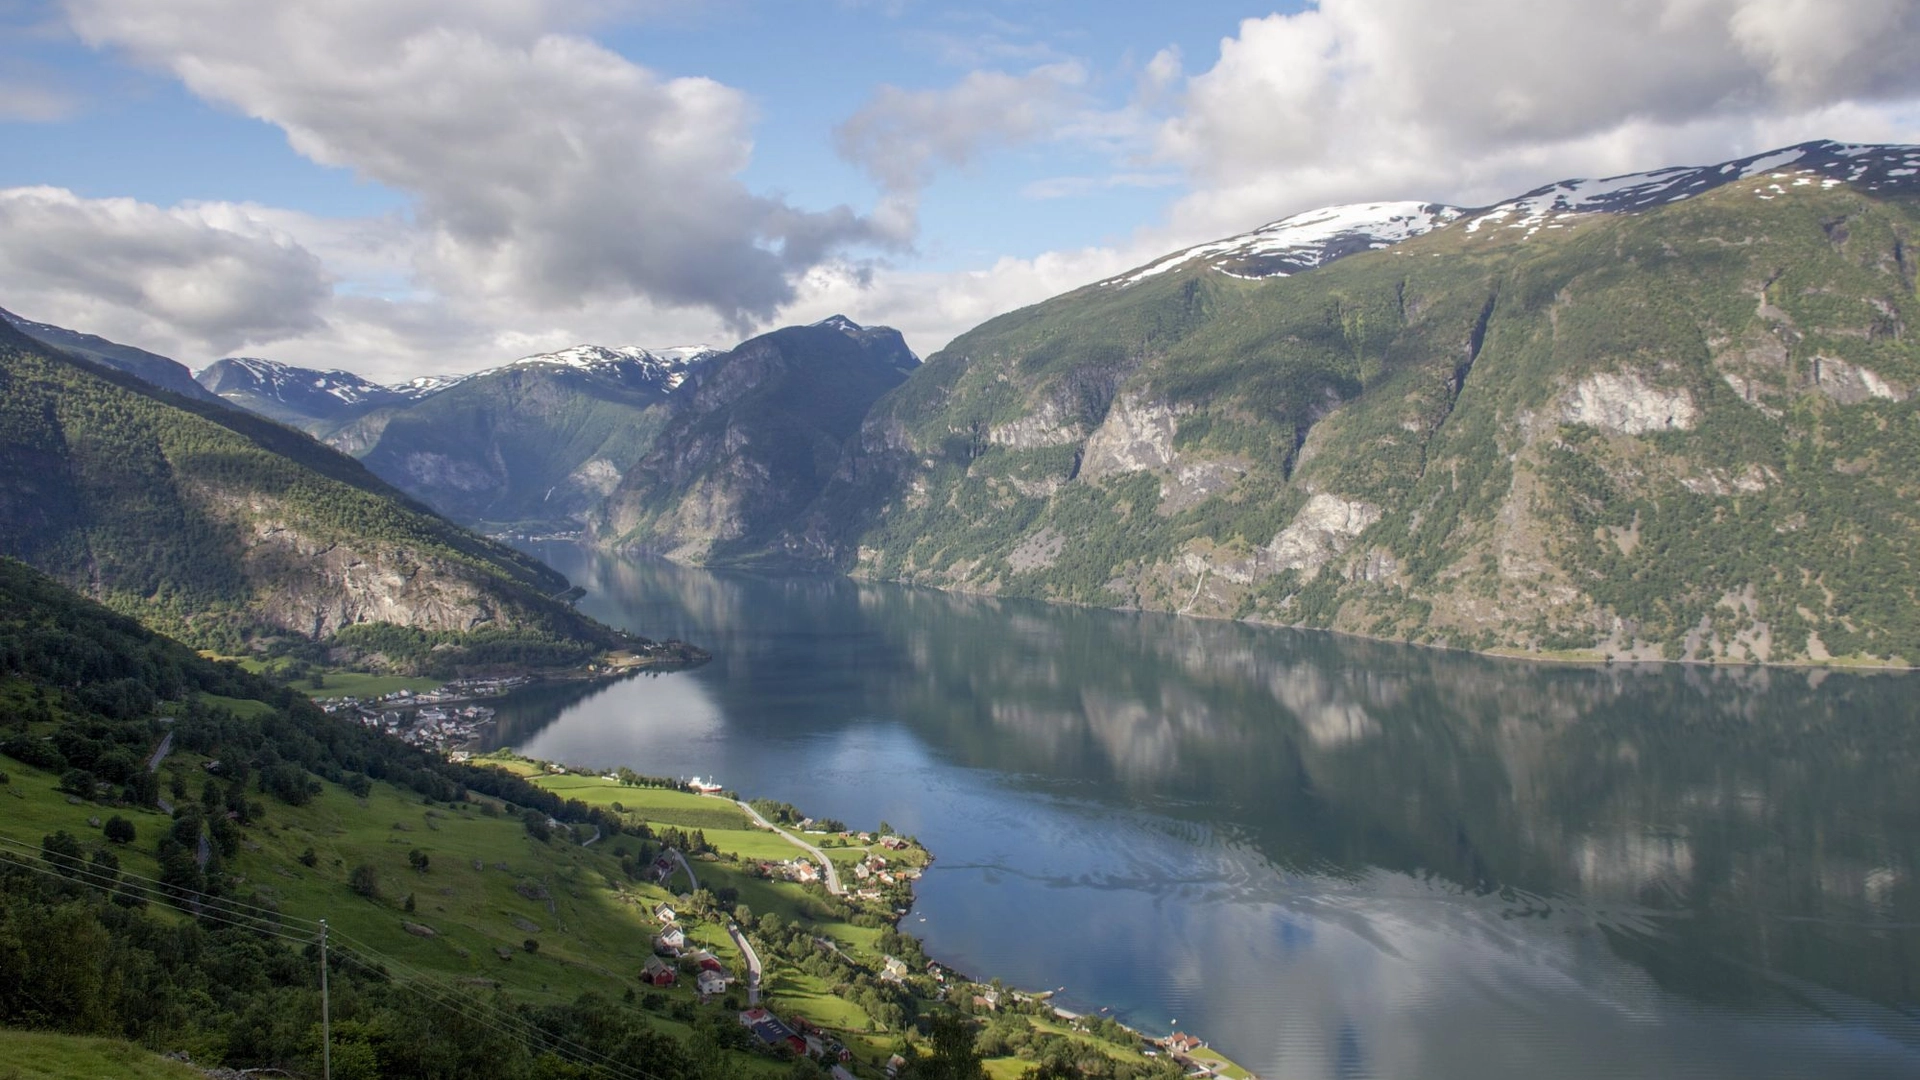 Aurland - Sognefjord in a nutshell, Norway